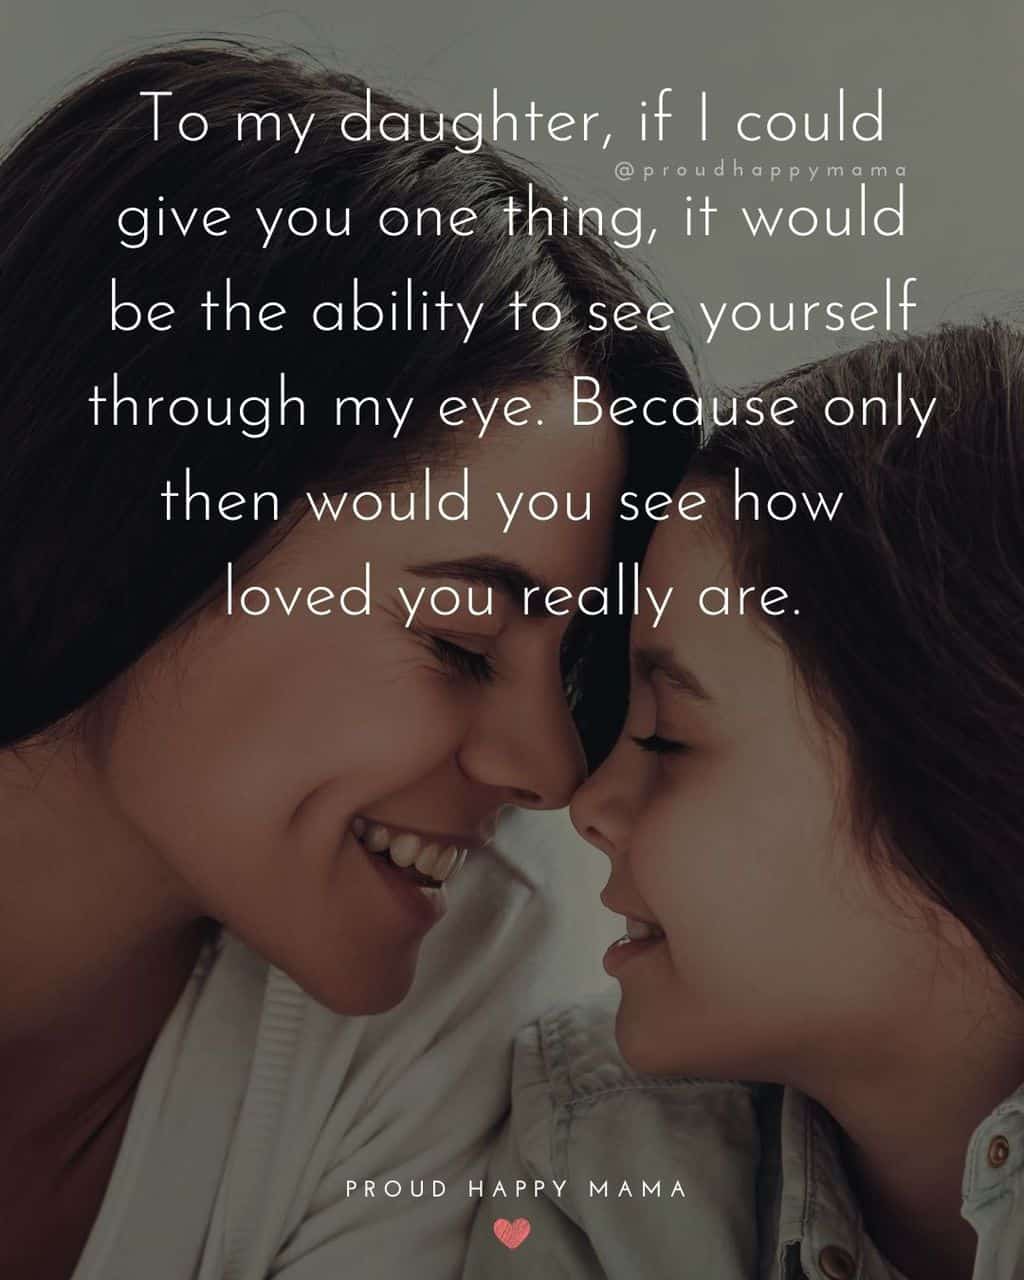 i love you my daughter quotes - ‘To my daughter, if I could give you one thing, it would be the ability to see yourself through my eye. Because only then